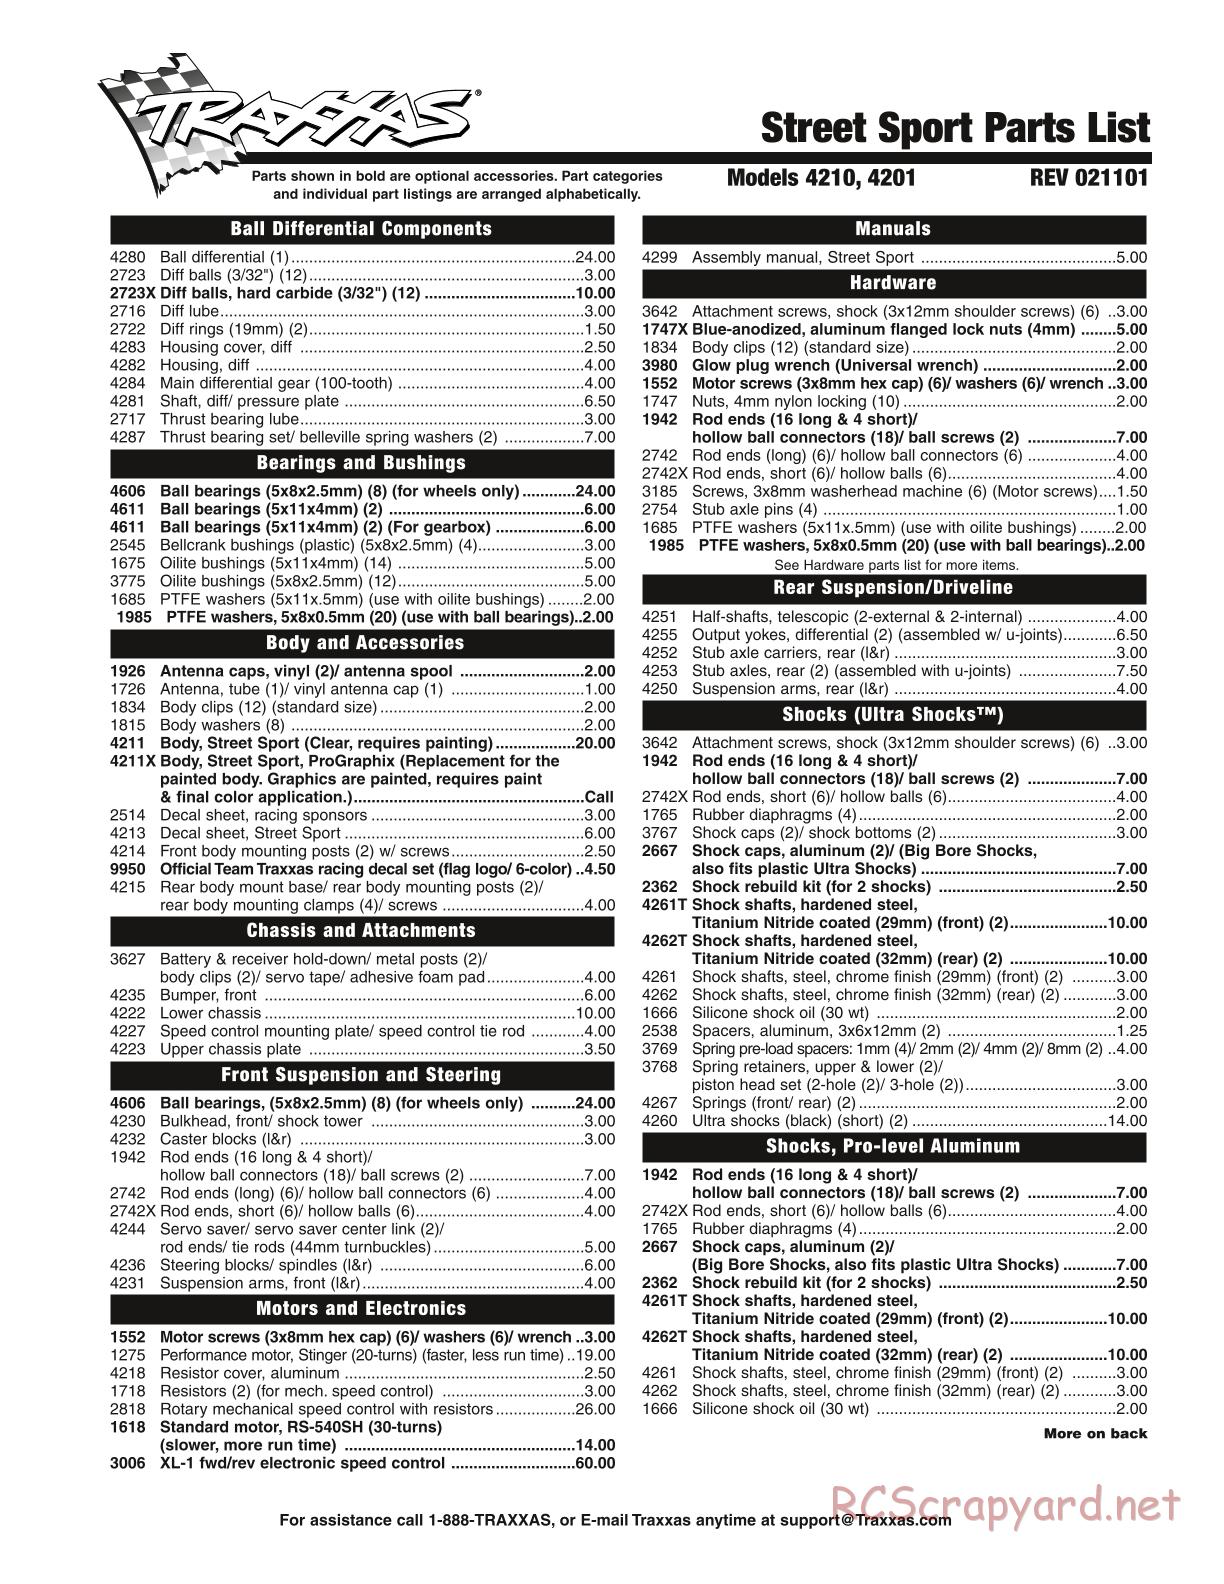 Traxxas - Street Sport - Parts List - Page 1